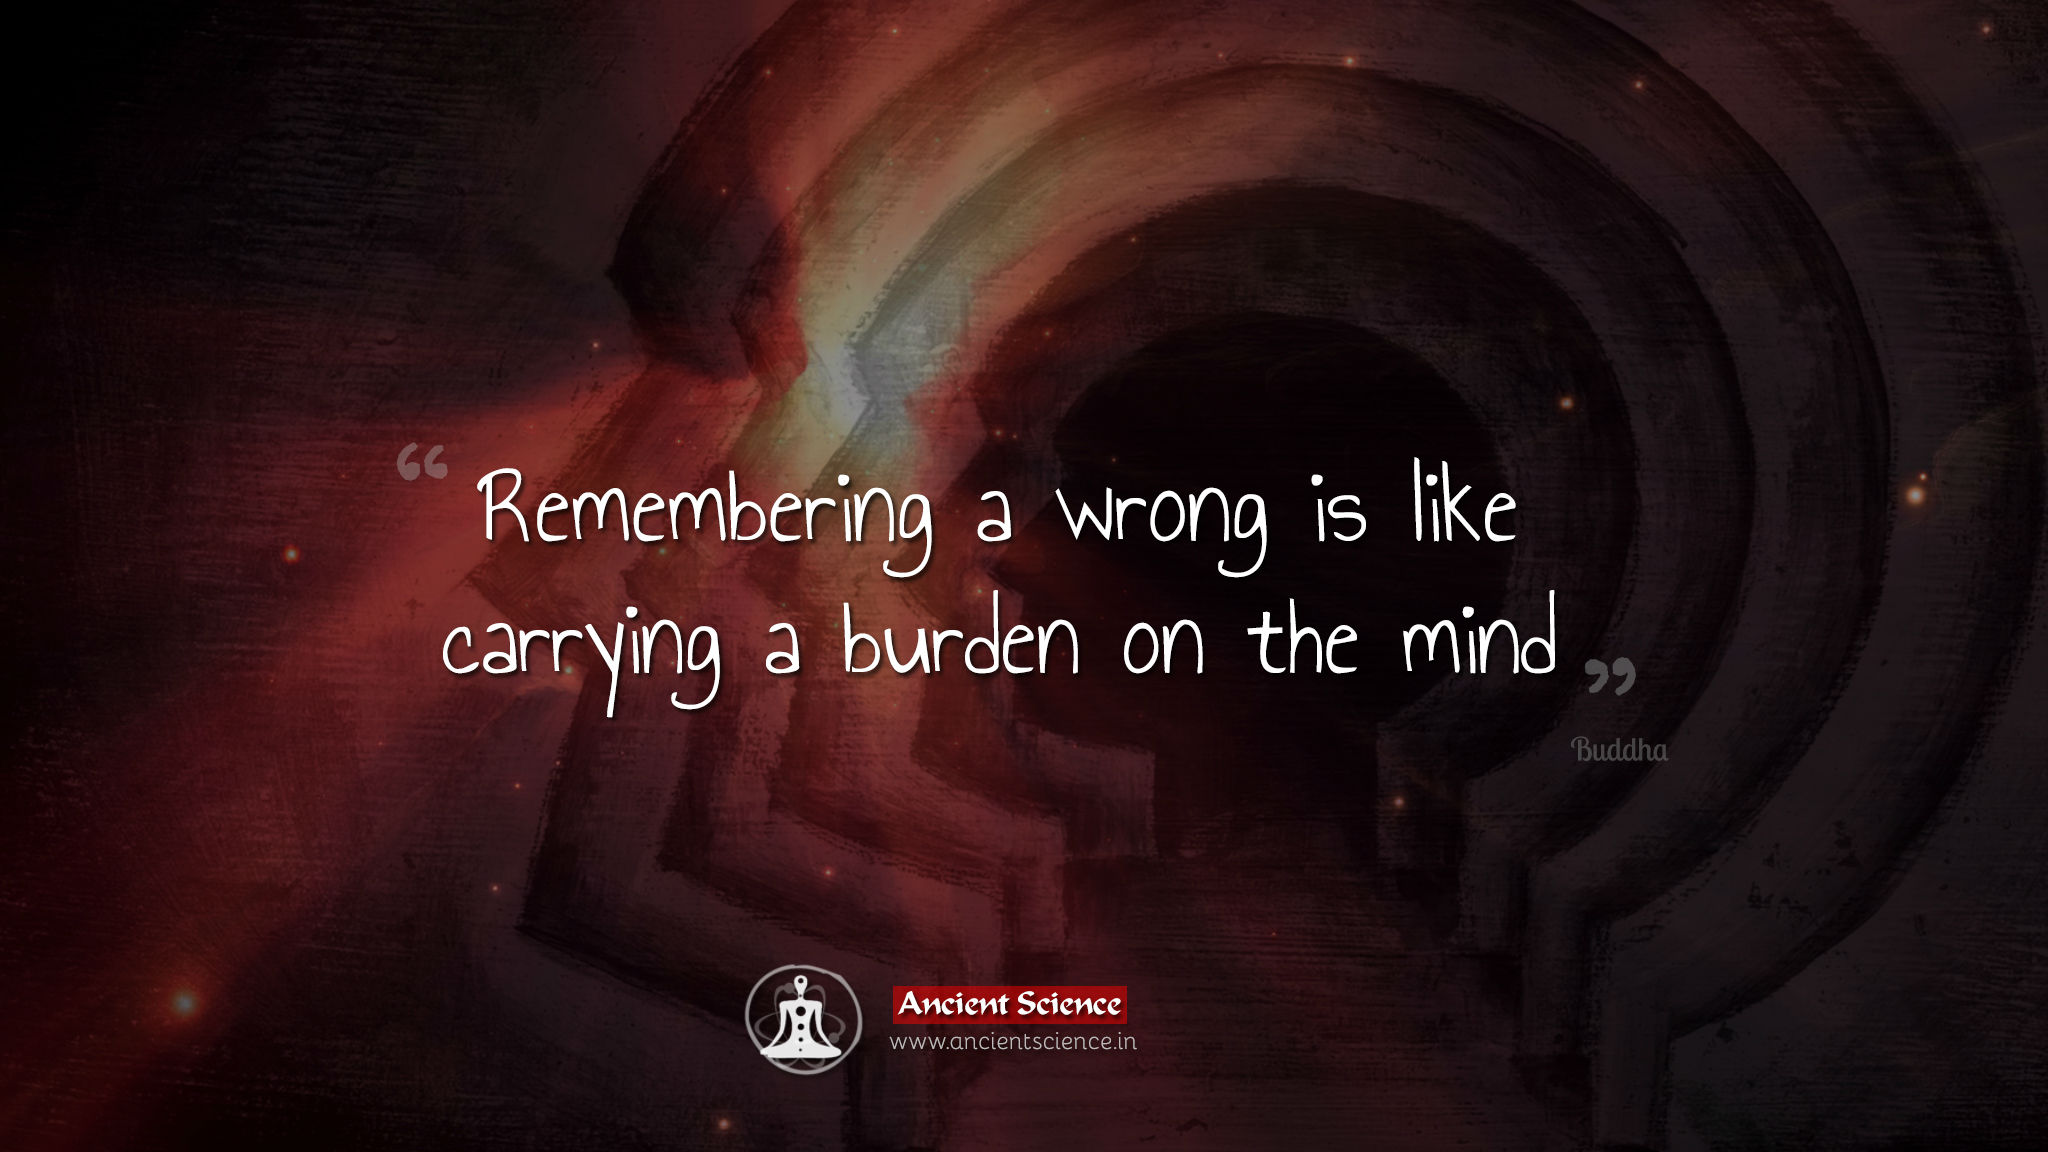 Remembering a wrong is like carrying a burden on the mind